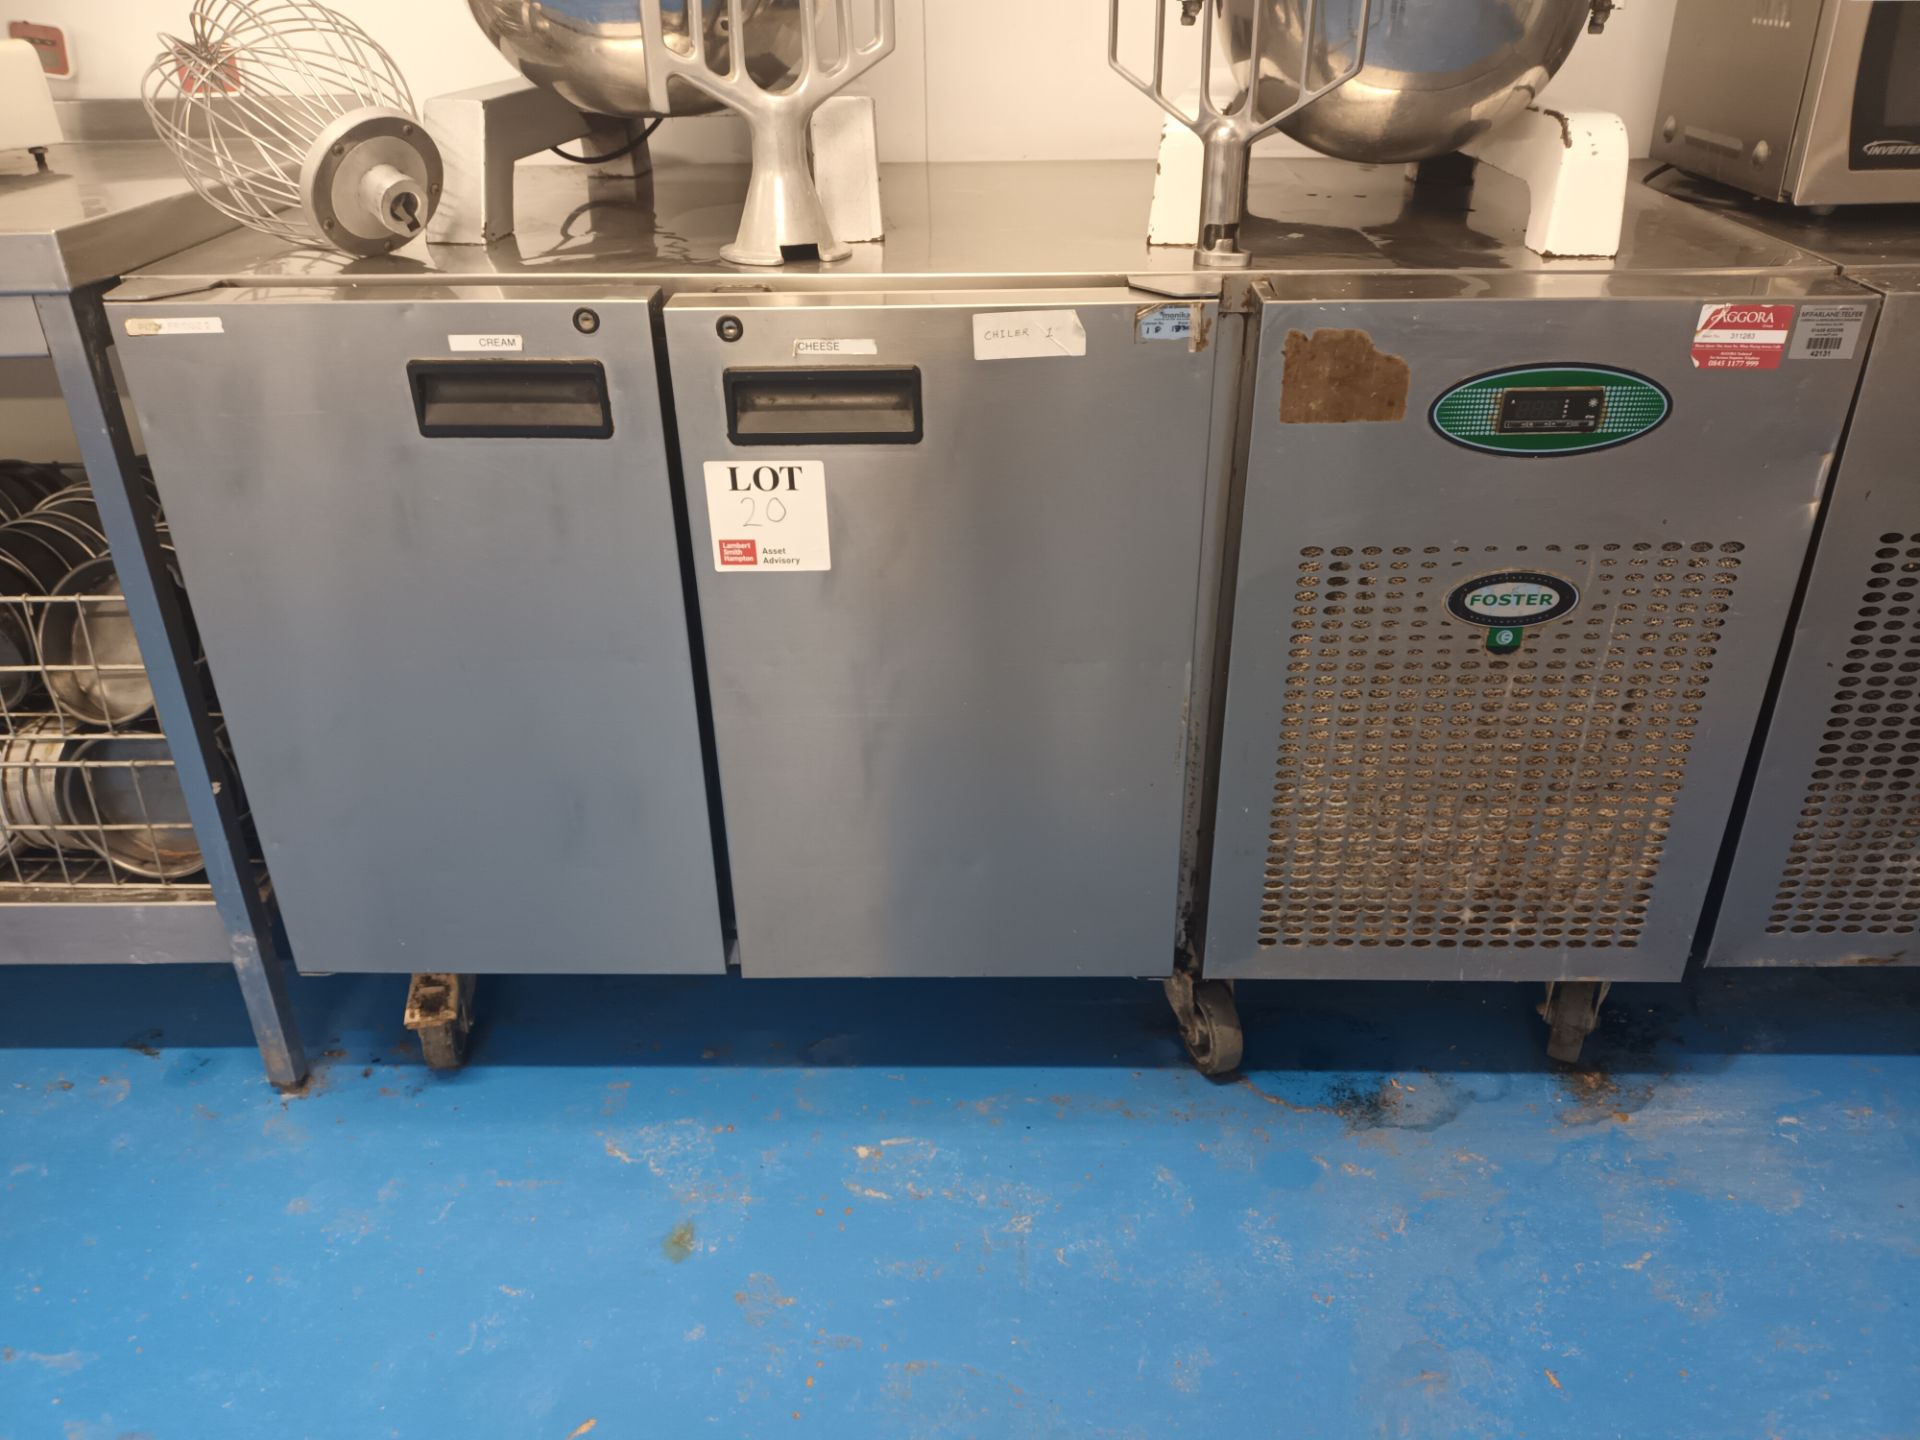 Foster EPRO1/2H/730DAS two door refrigerated stainless steel counter